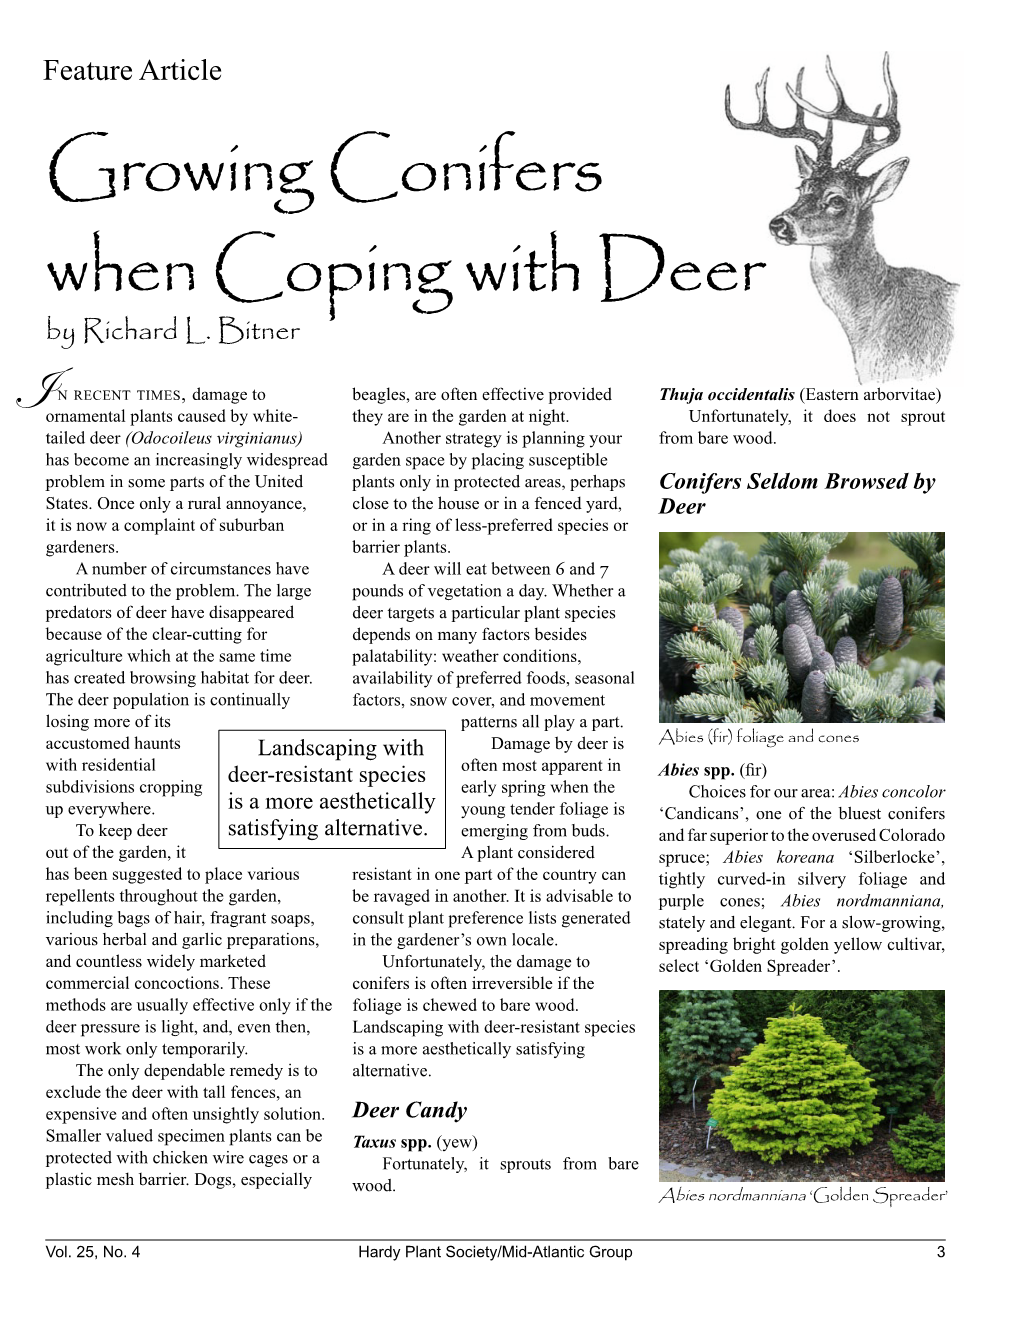 Growing Conifers When Coping with Deer by Richard L